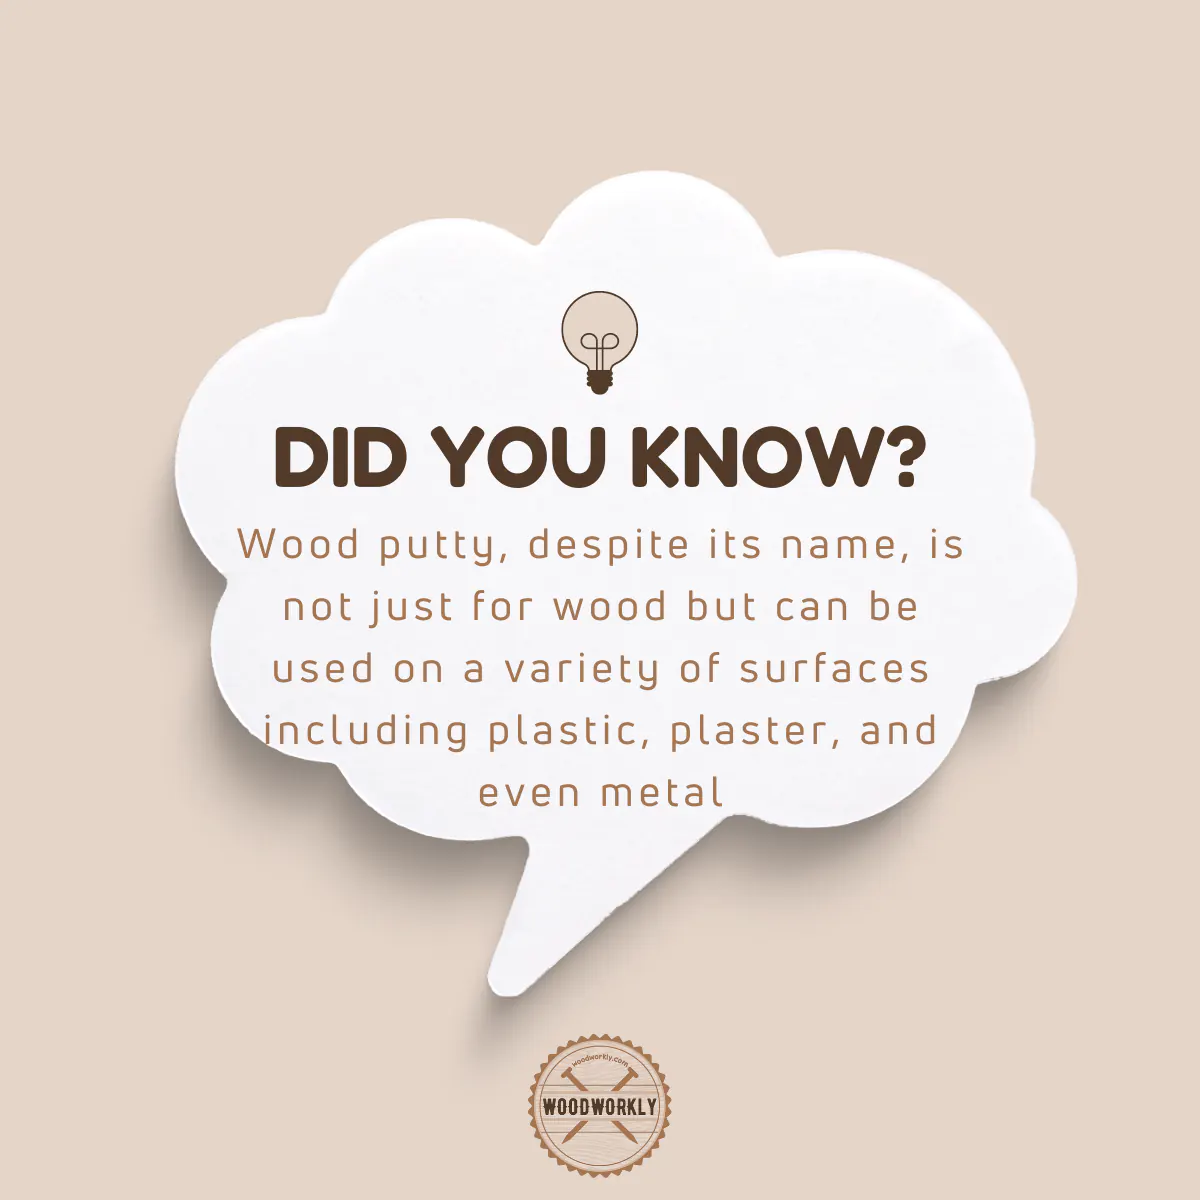 Did you know fact about wood putty